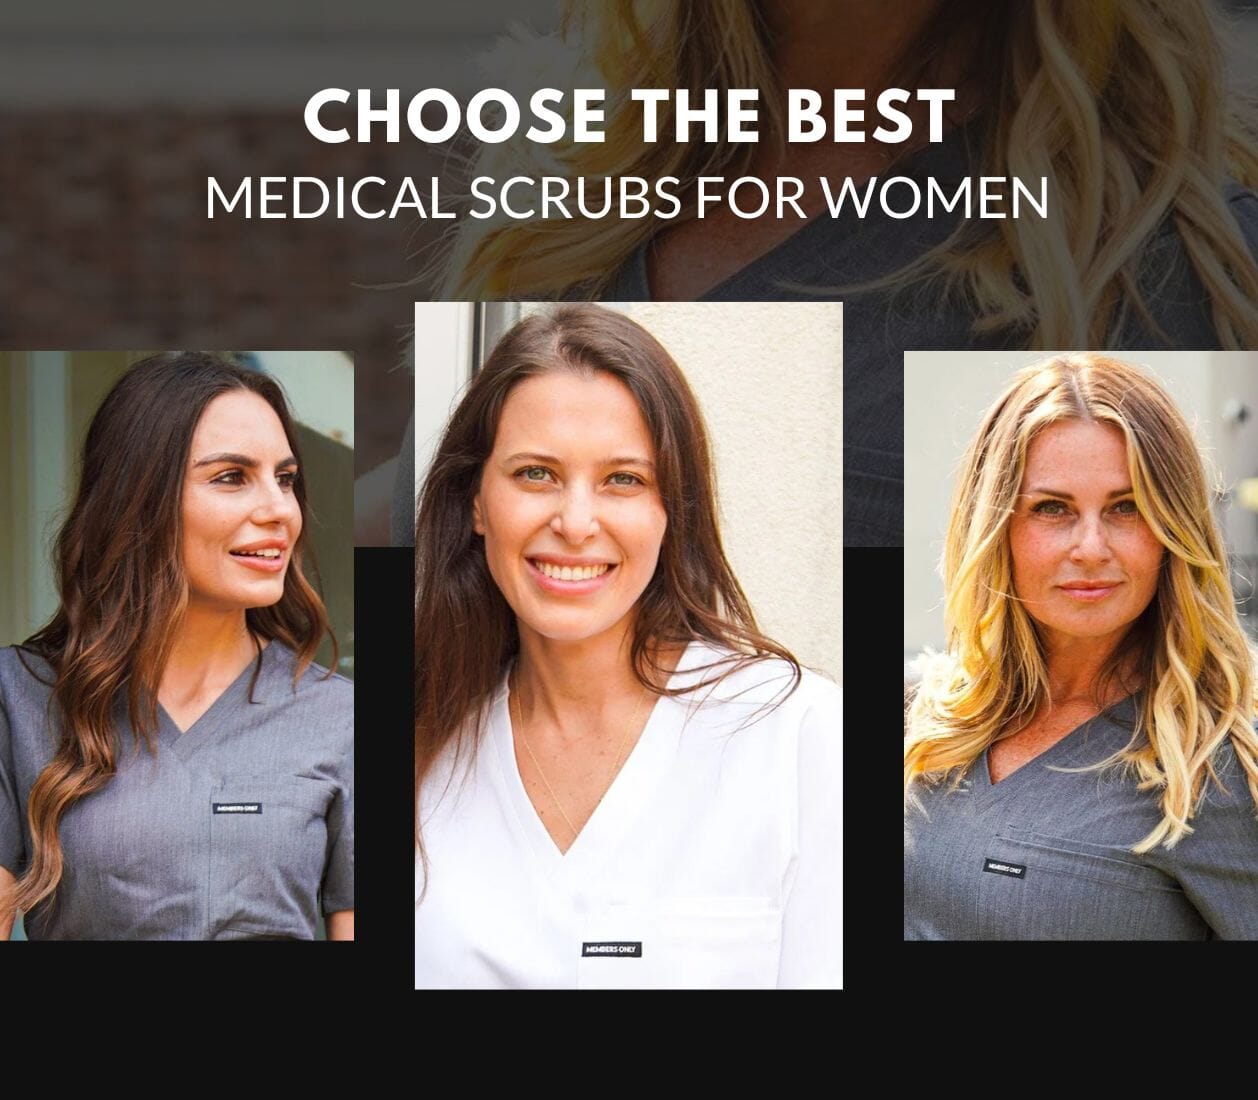 How to Choose the Best Medical Scrubs for Women?